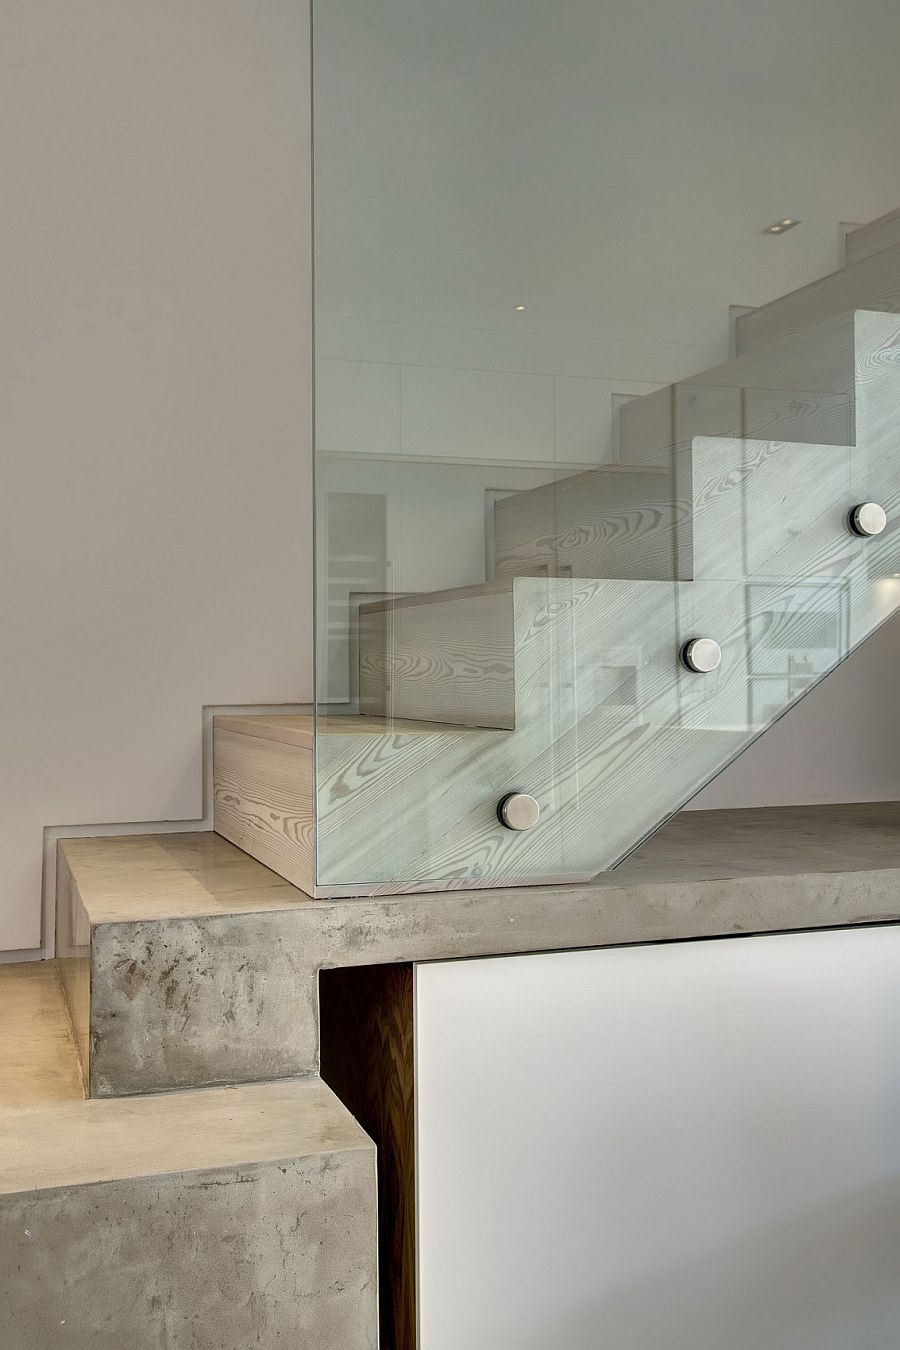 Wooden staircase with glass railing